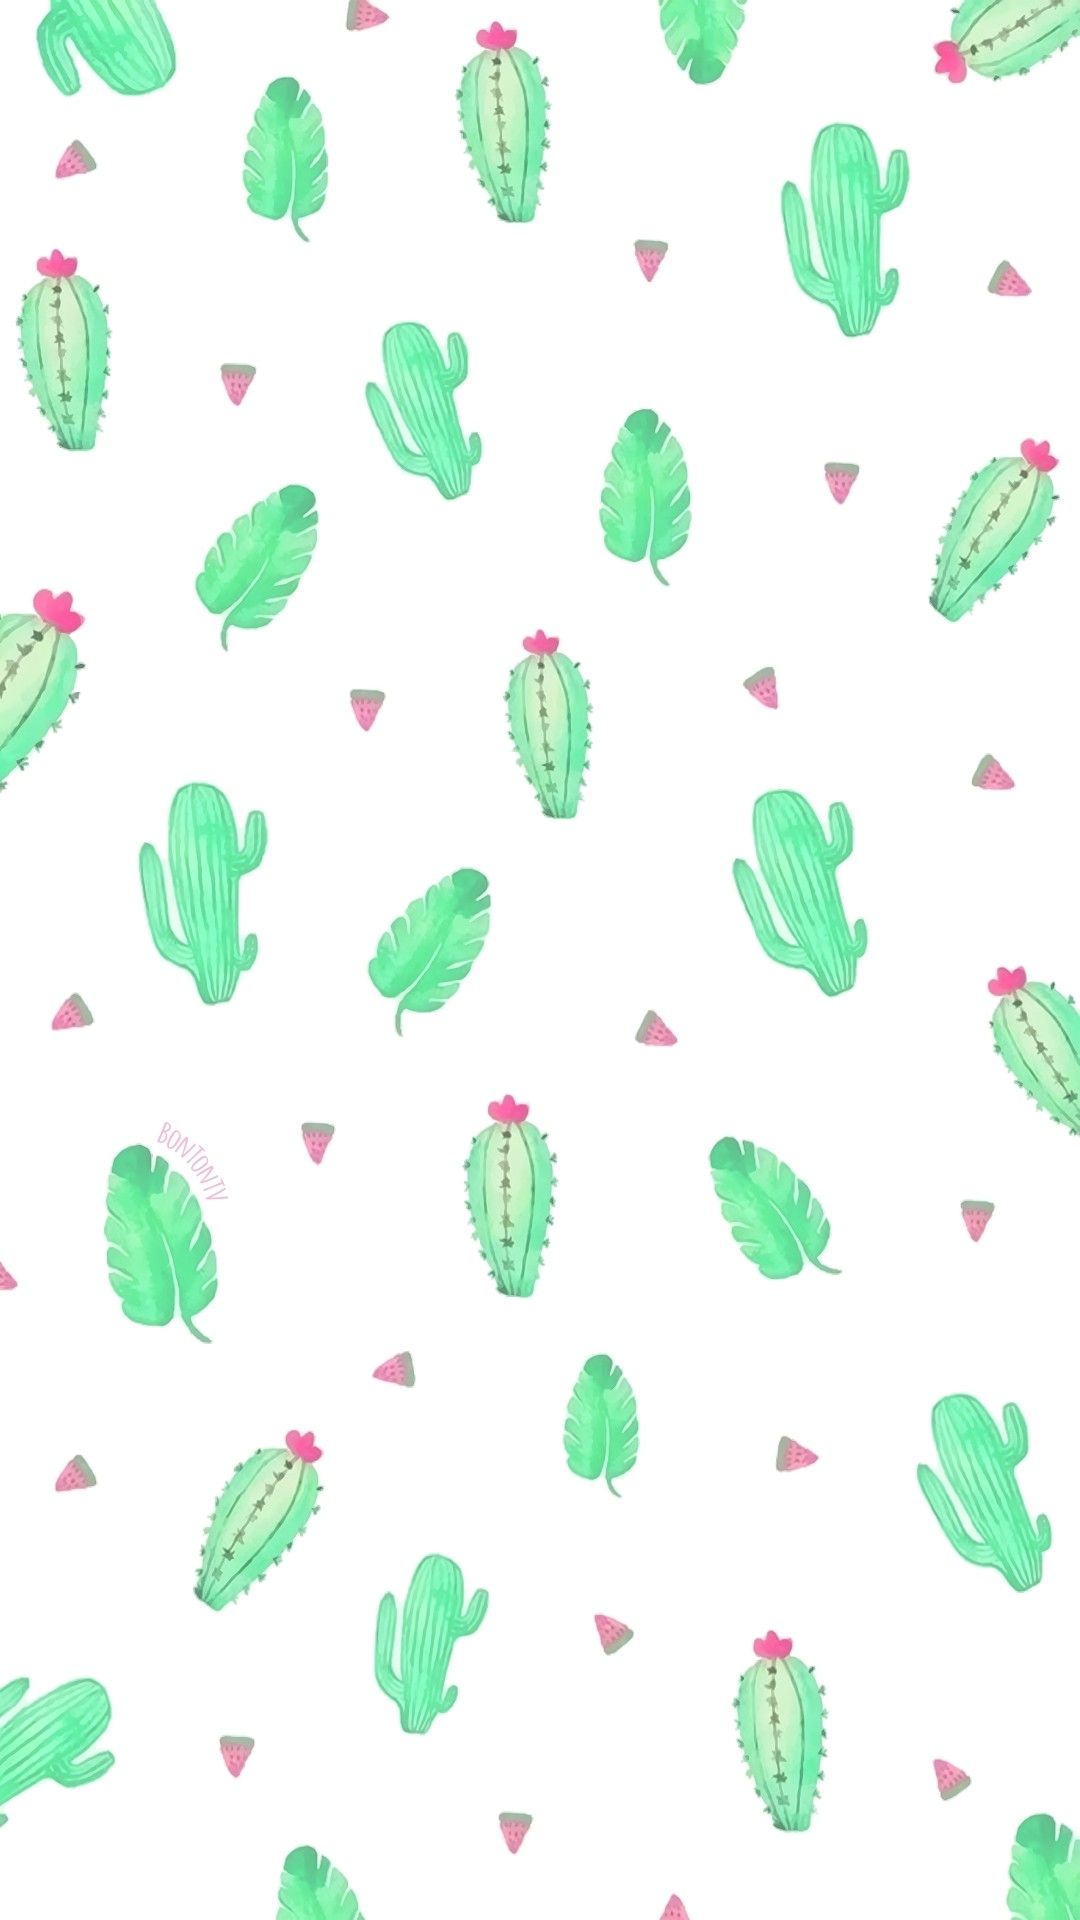 IPhone wallpaper background cute cactus pattern watercolor pink green white background wallpaper background phone background iPhone background cute background wallpaper phone background - Cactus